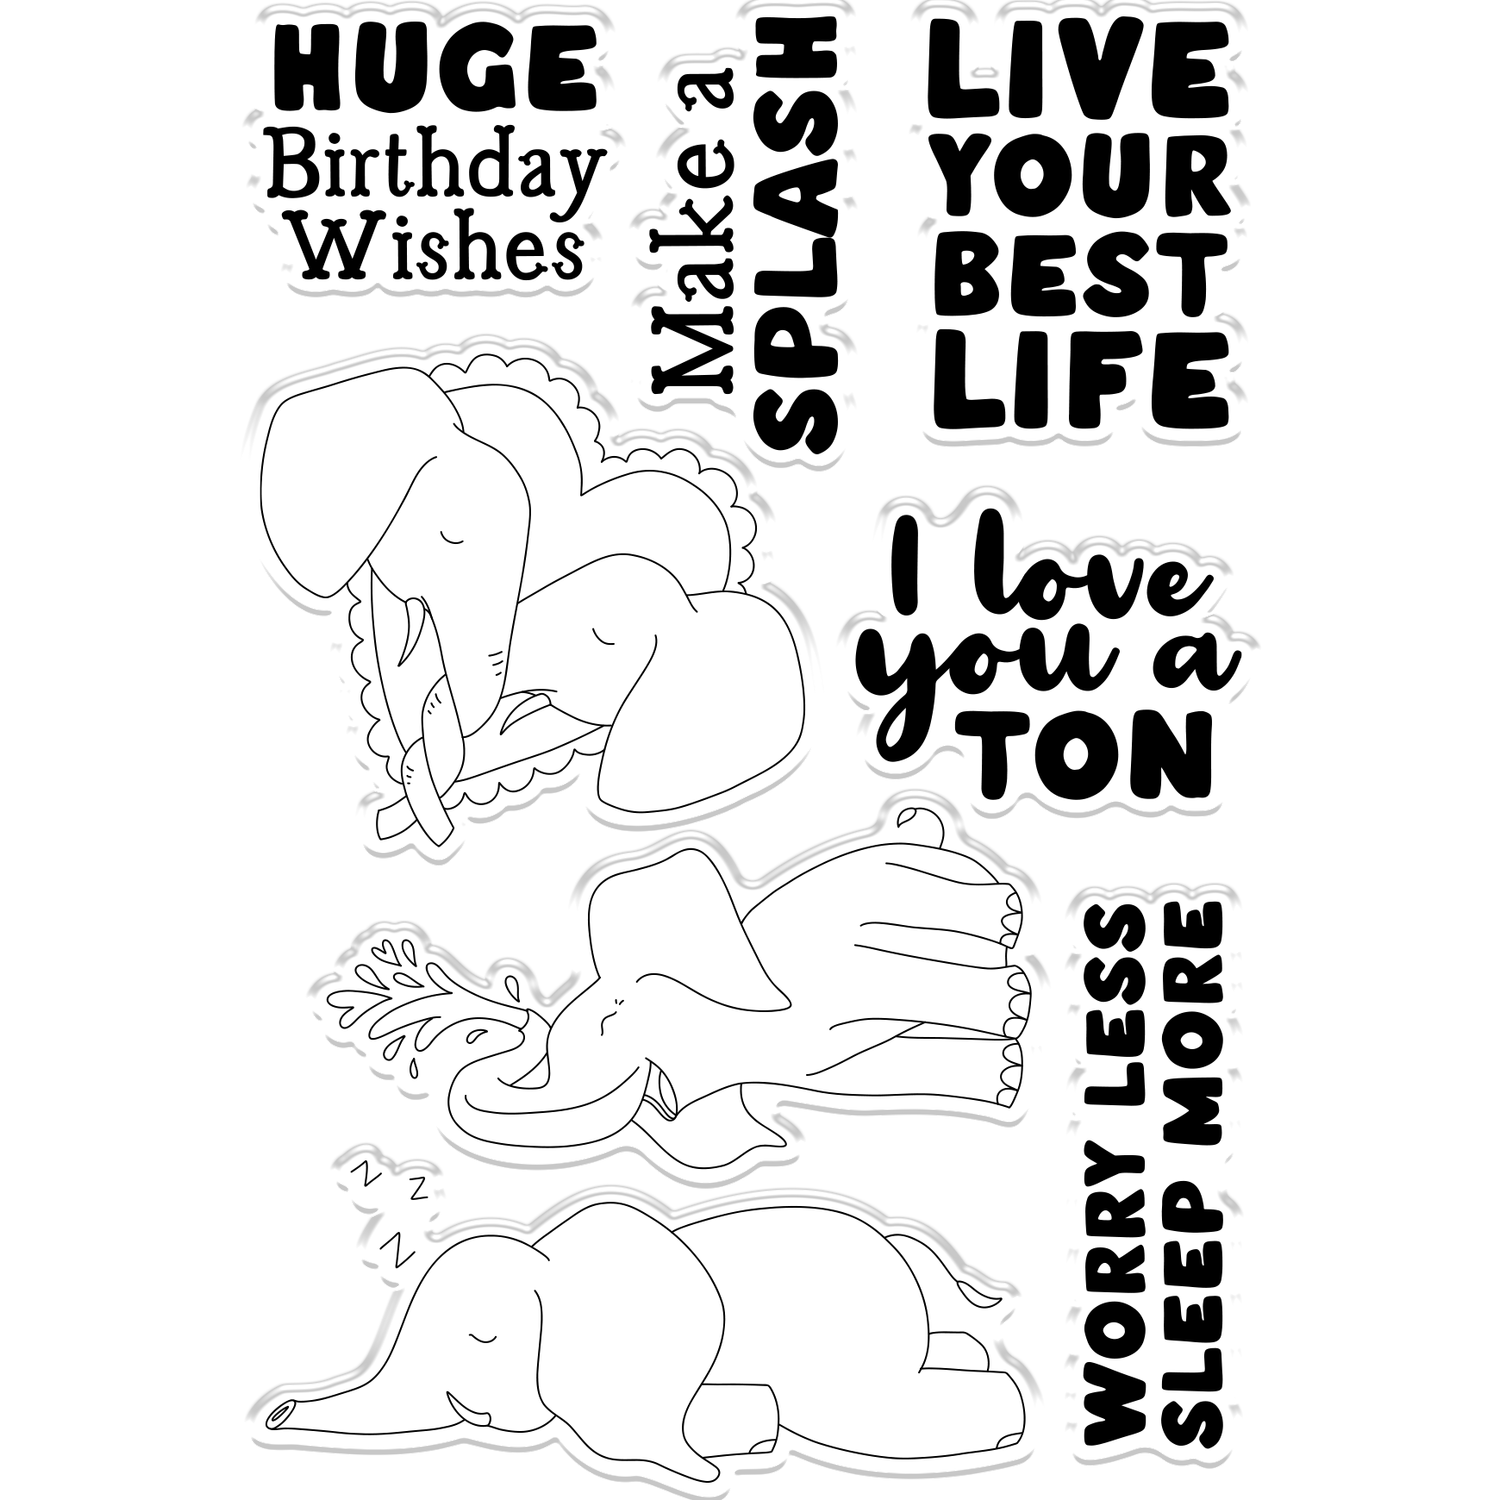 Crafters Companion Clear Acrylic Stamps - Huge Birthday Wishes Image 2